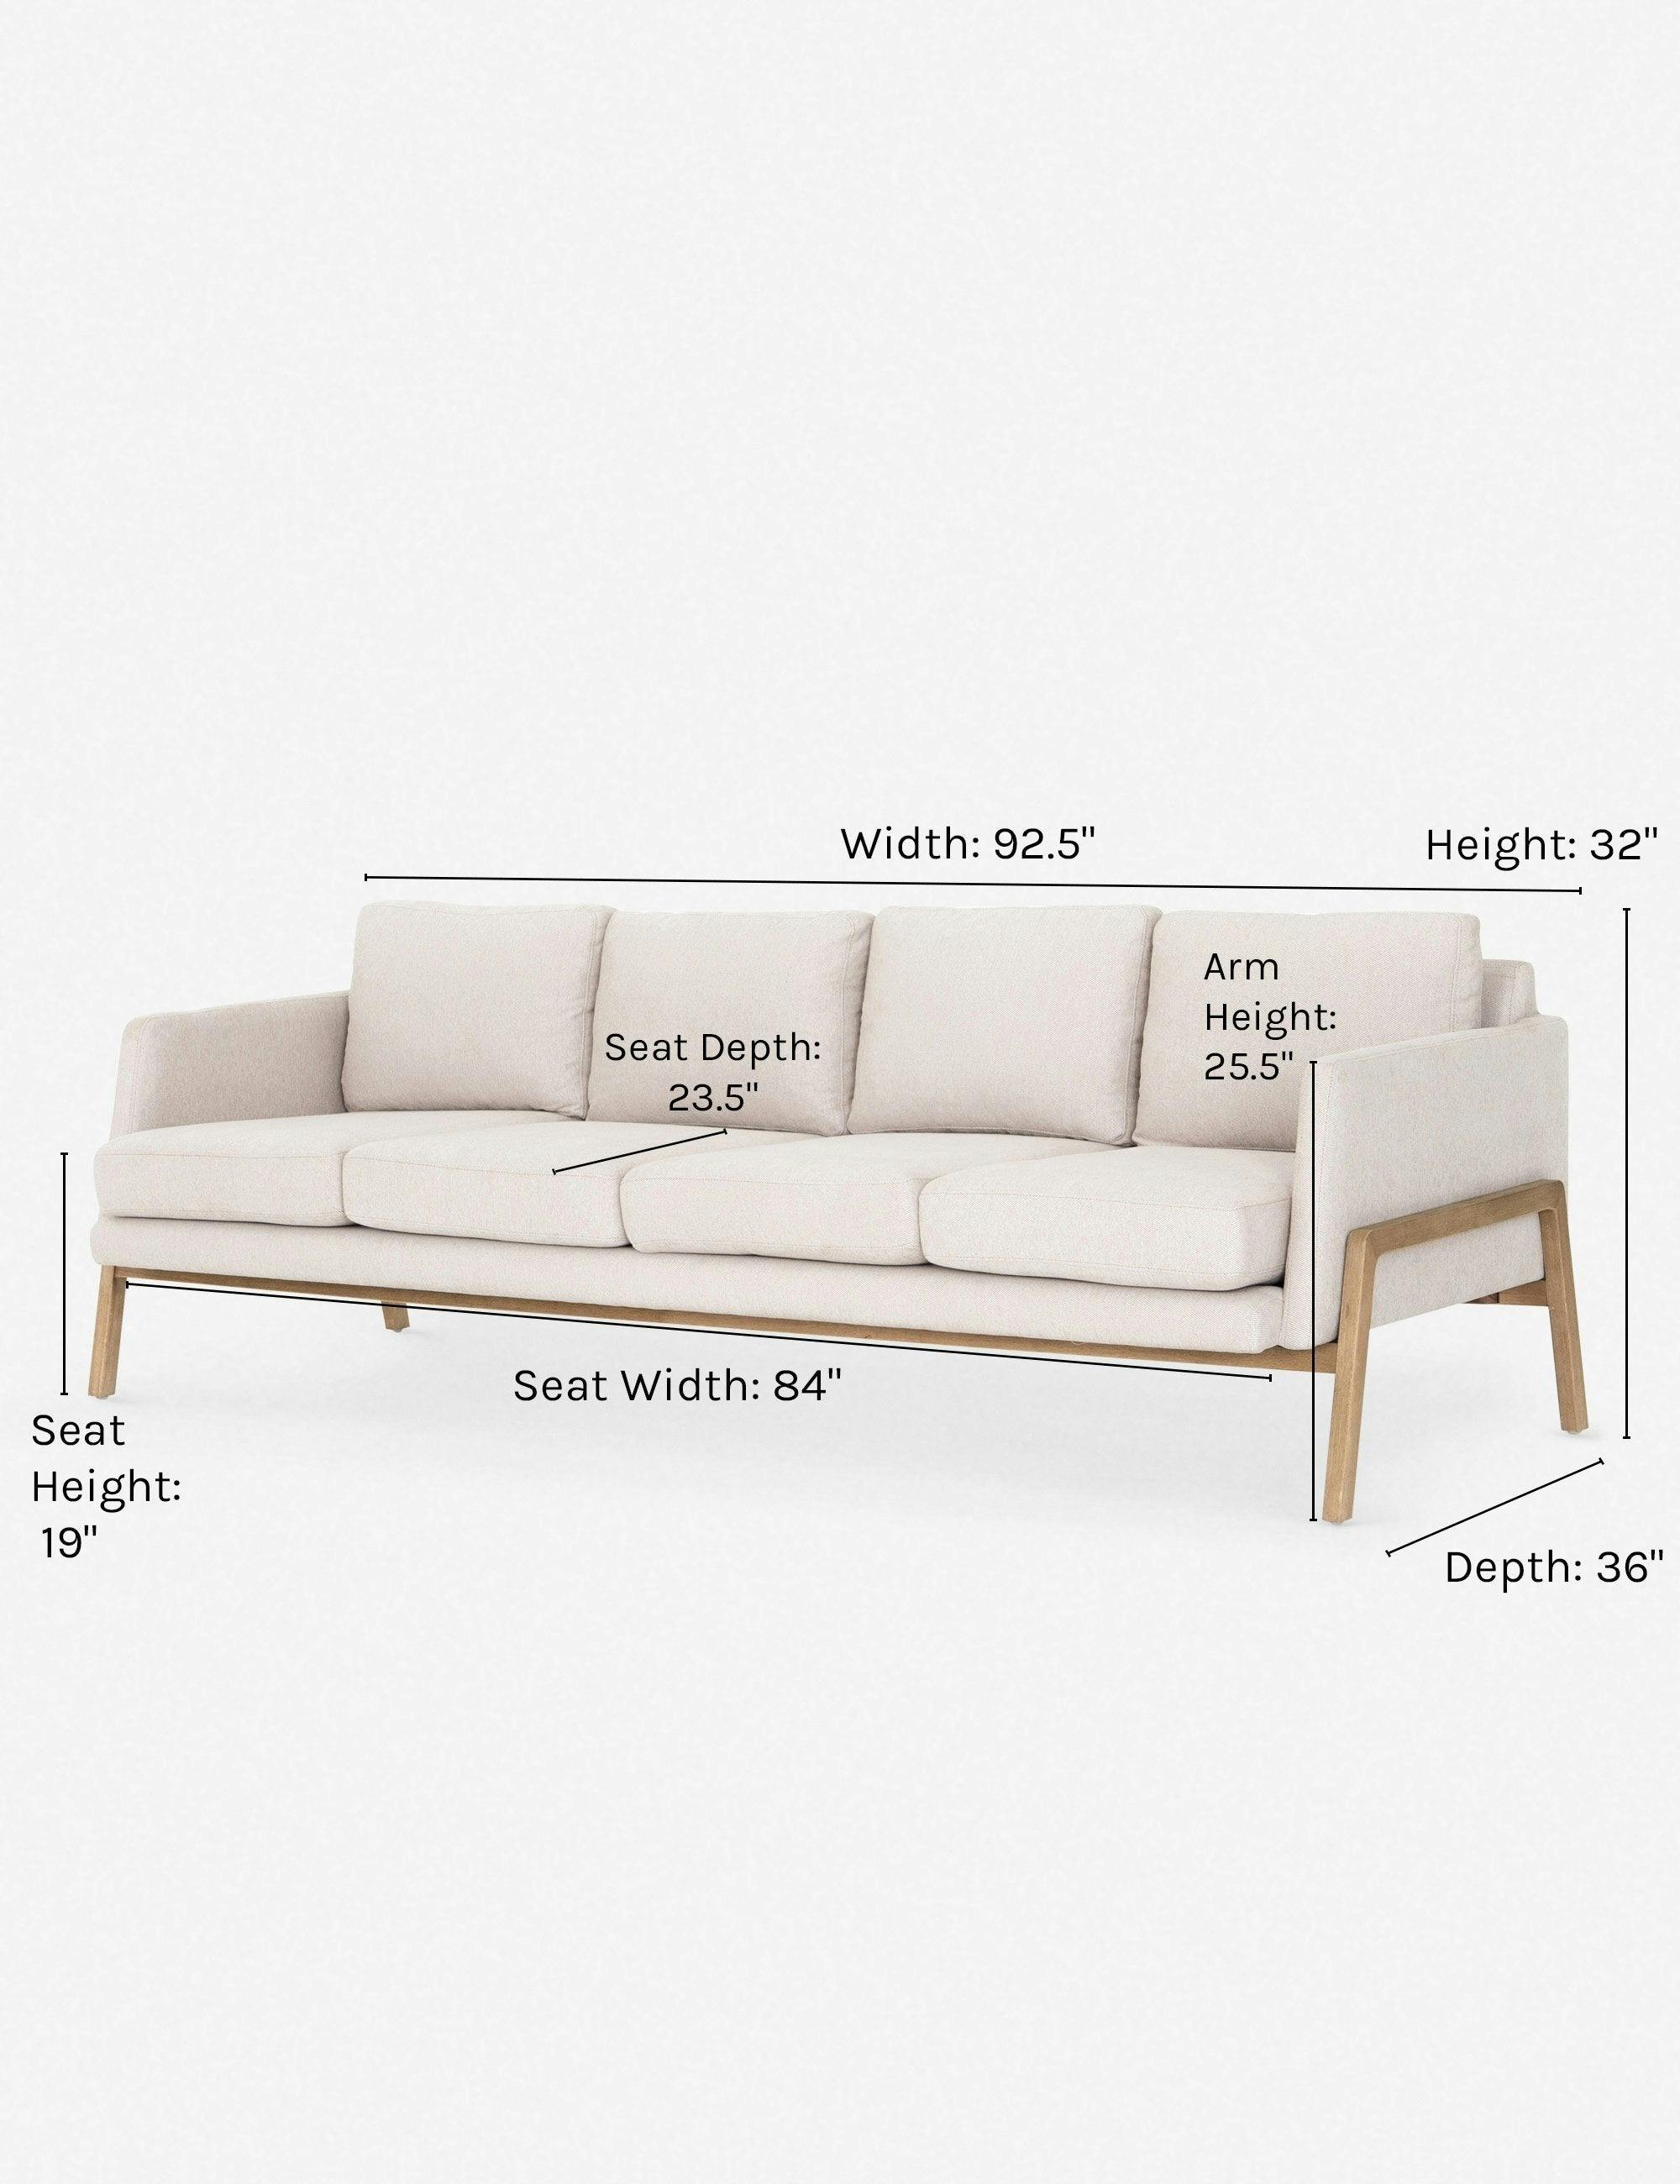 Afton Natural Performance Fabric Angled Wooden Frame Sofa